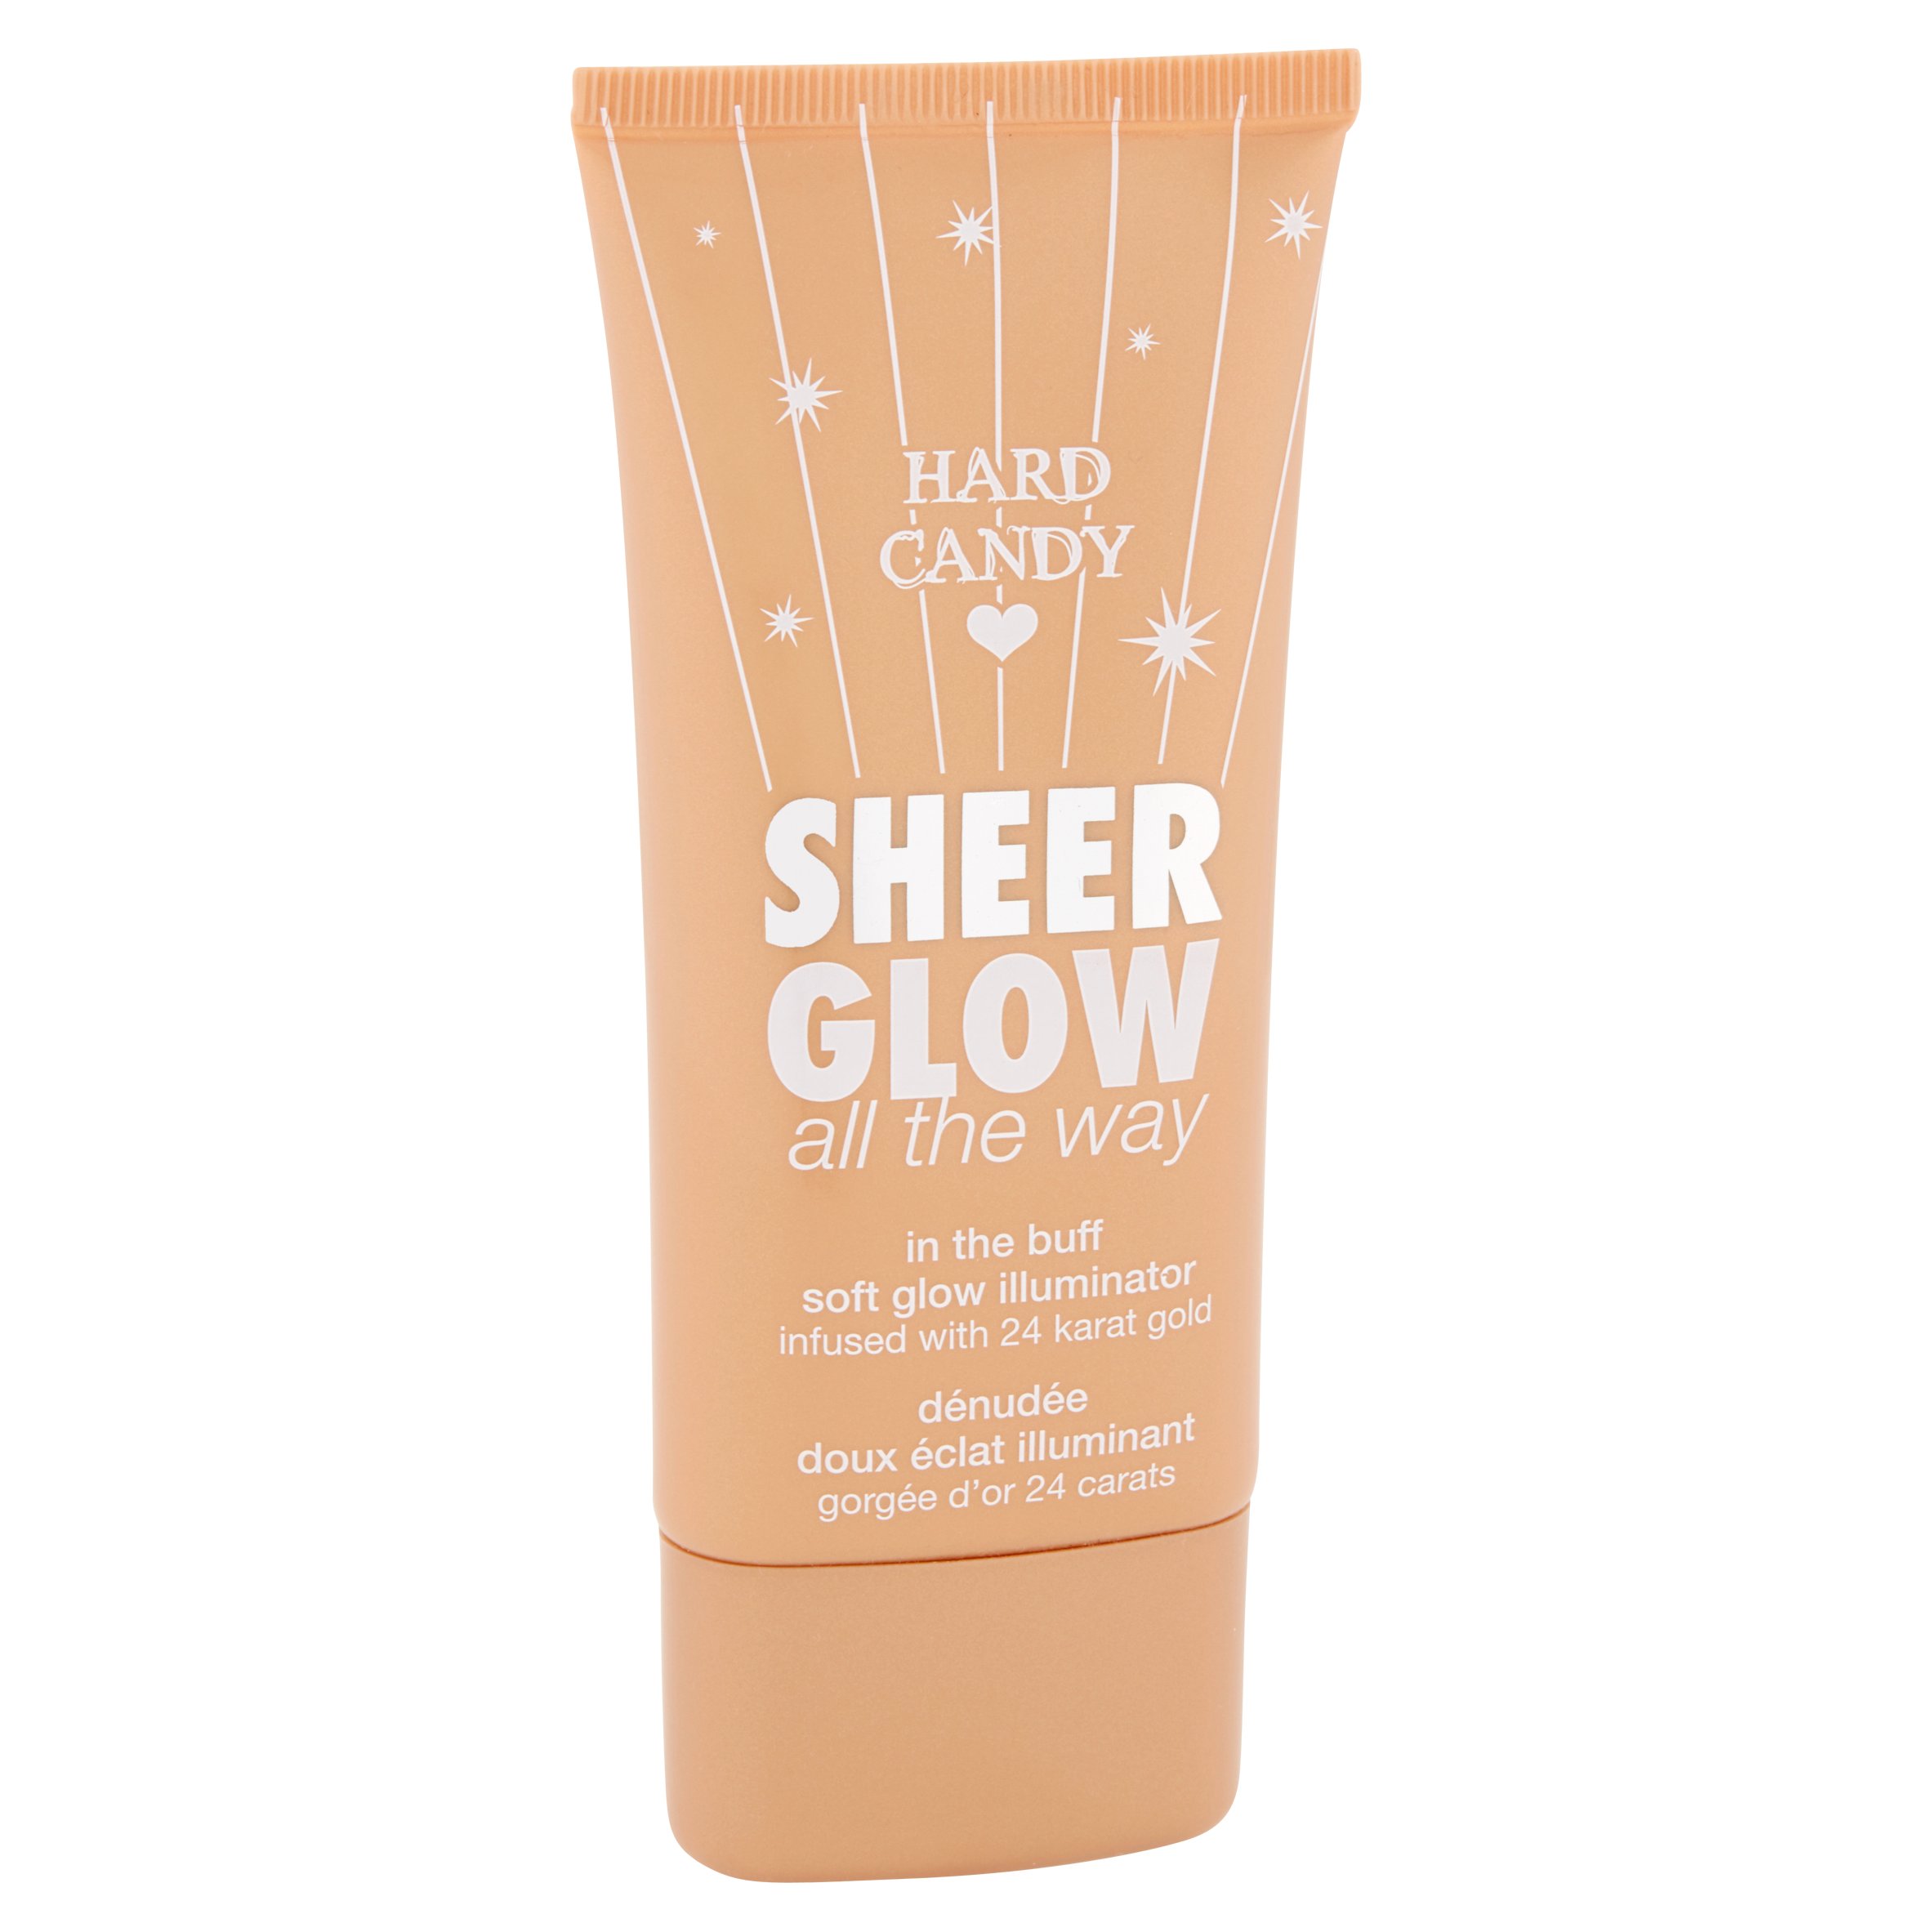 Hard Candy Sheer Glow all the way, 0842 In The Buff, 2.7 oz - image 2 of 4